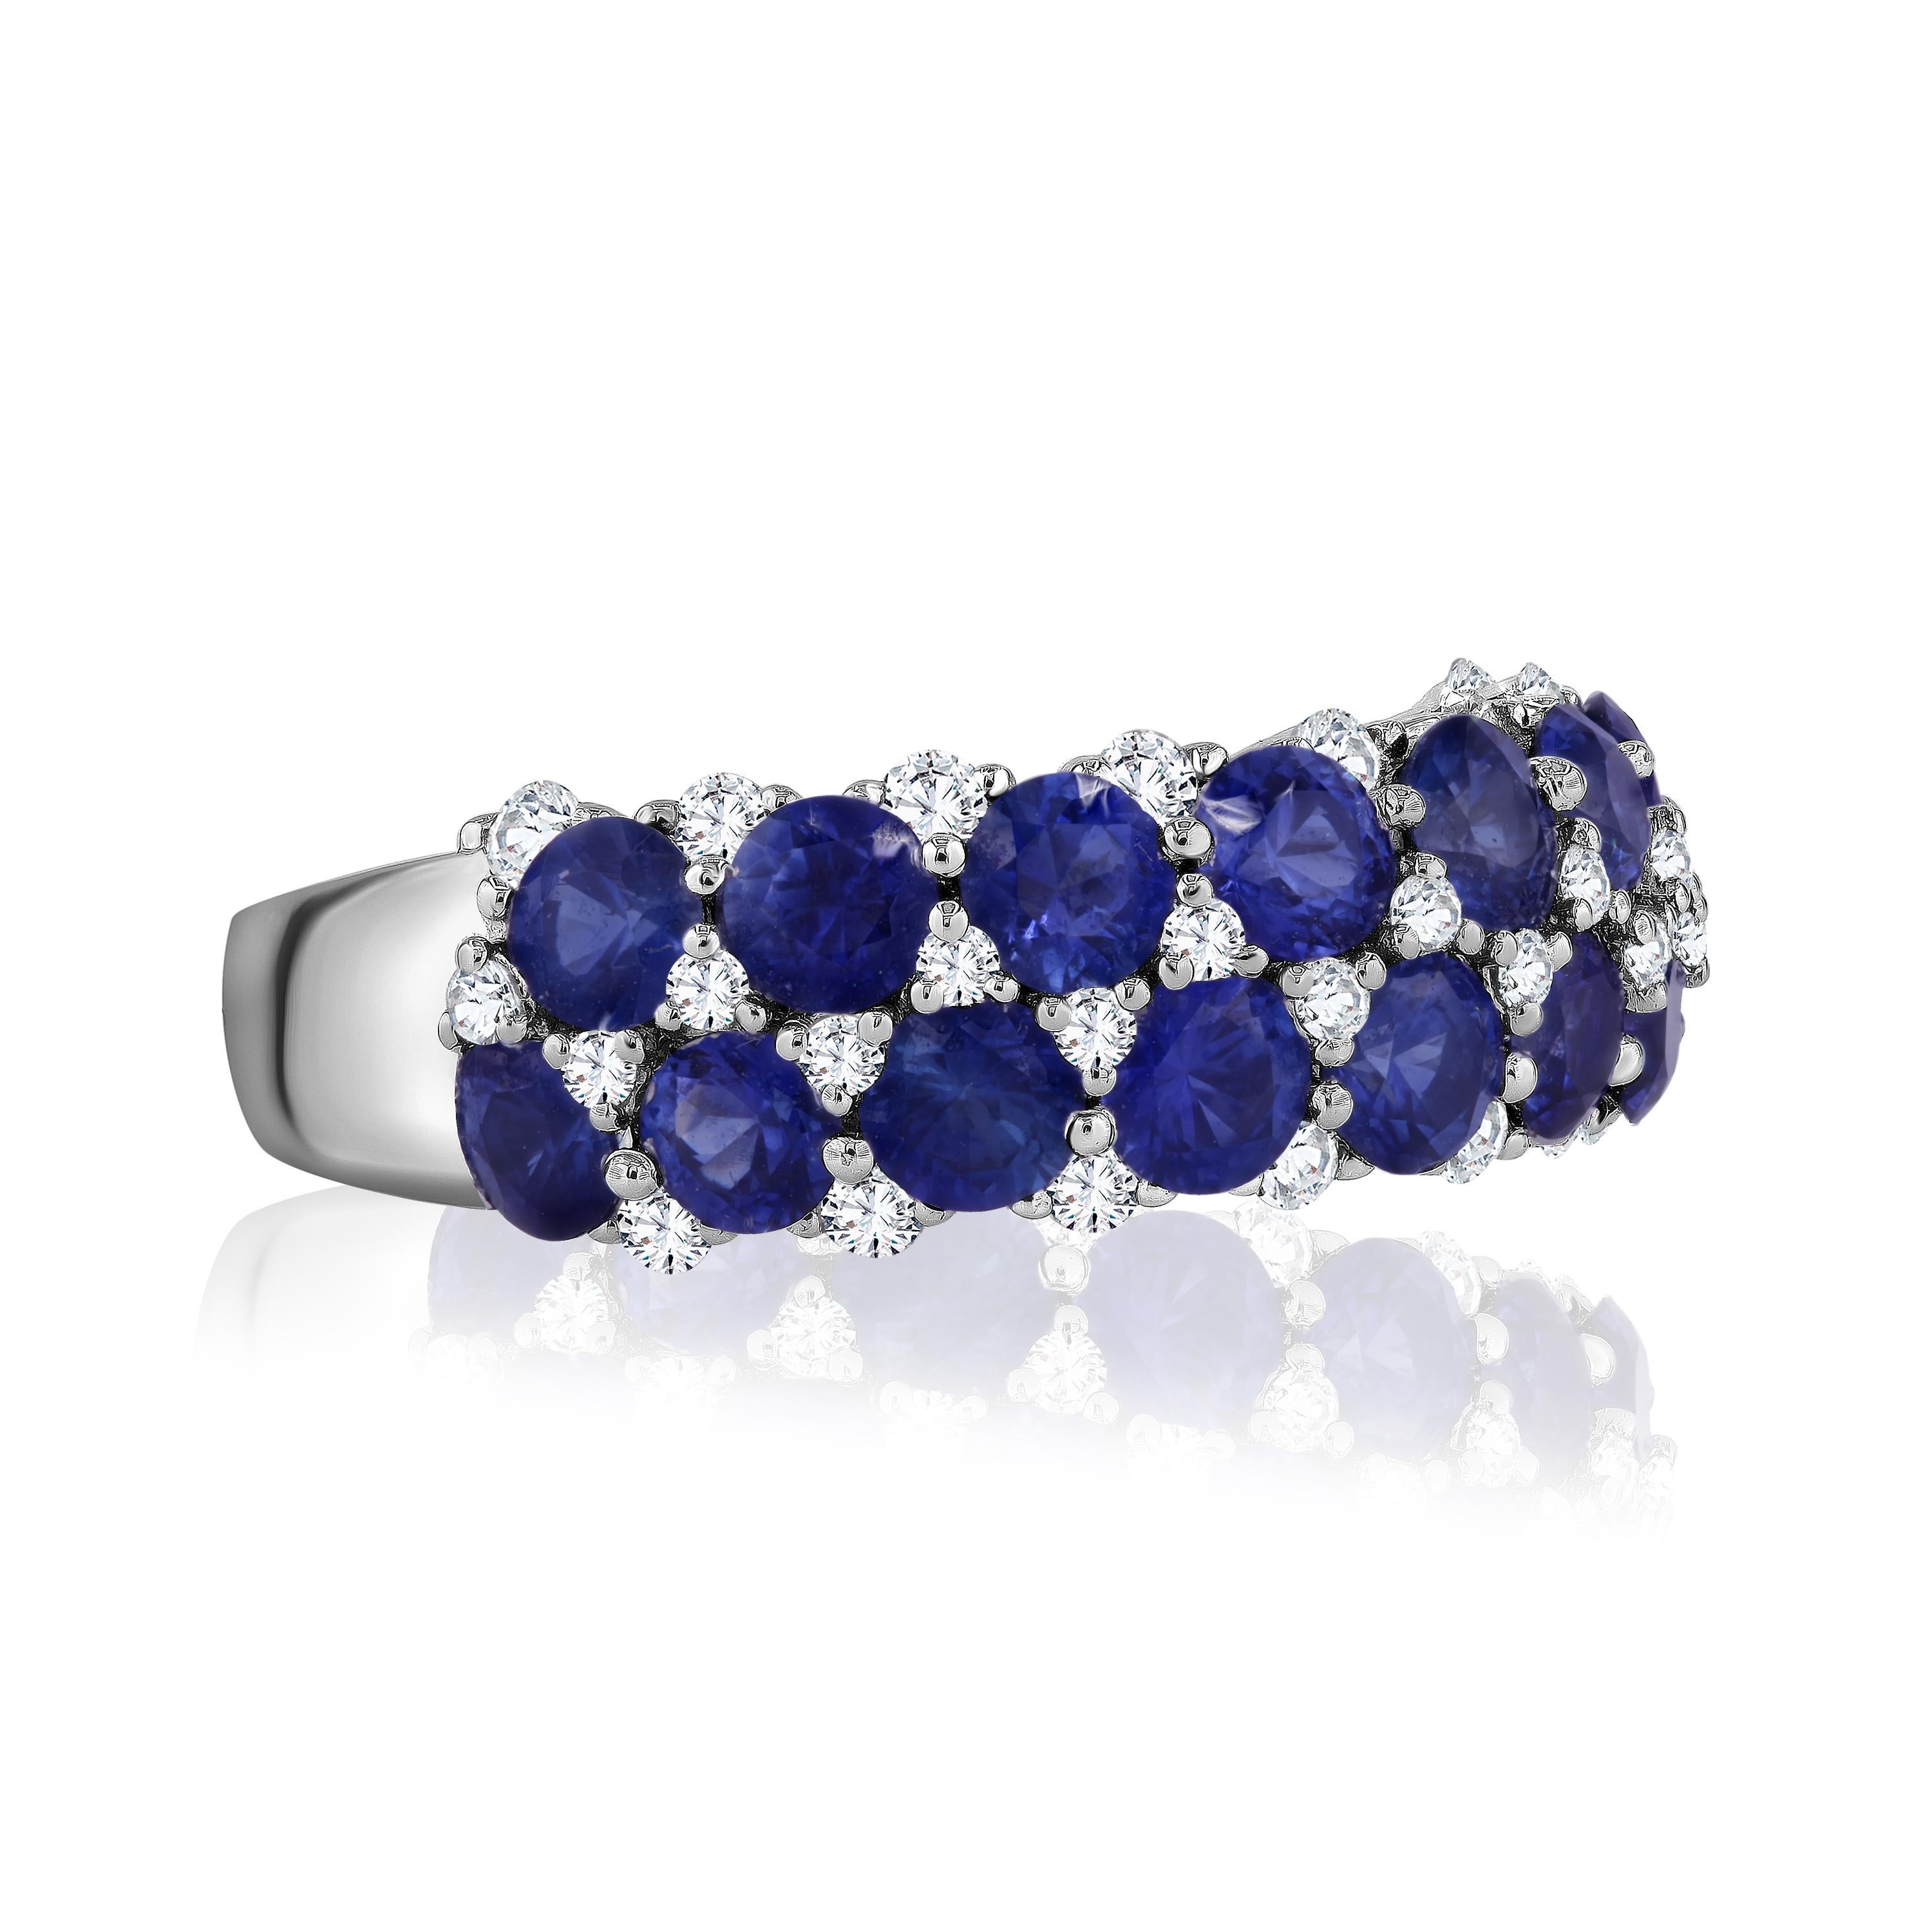 2.58 Carat Blue Sapphire and 0.38 Carat Natural Diamond Fashion Ring ref1236 For Sale 1